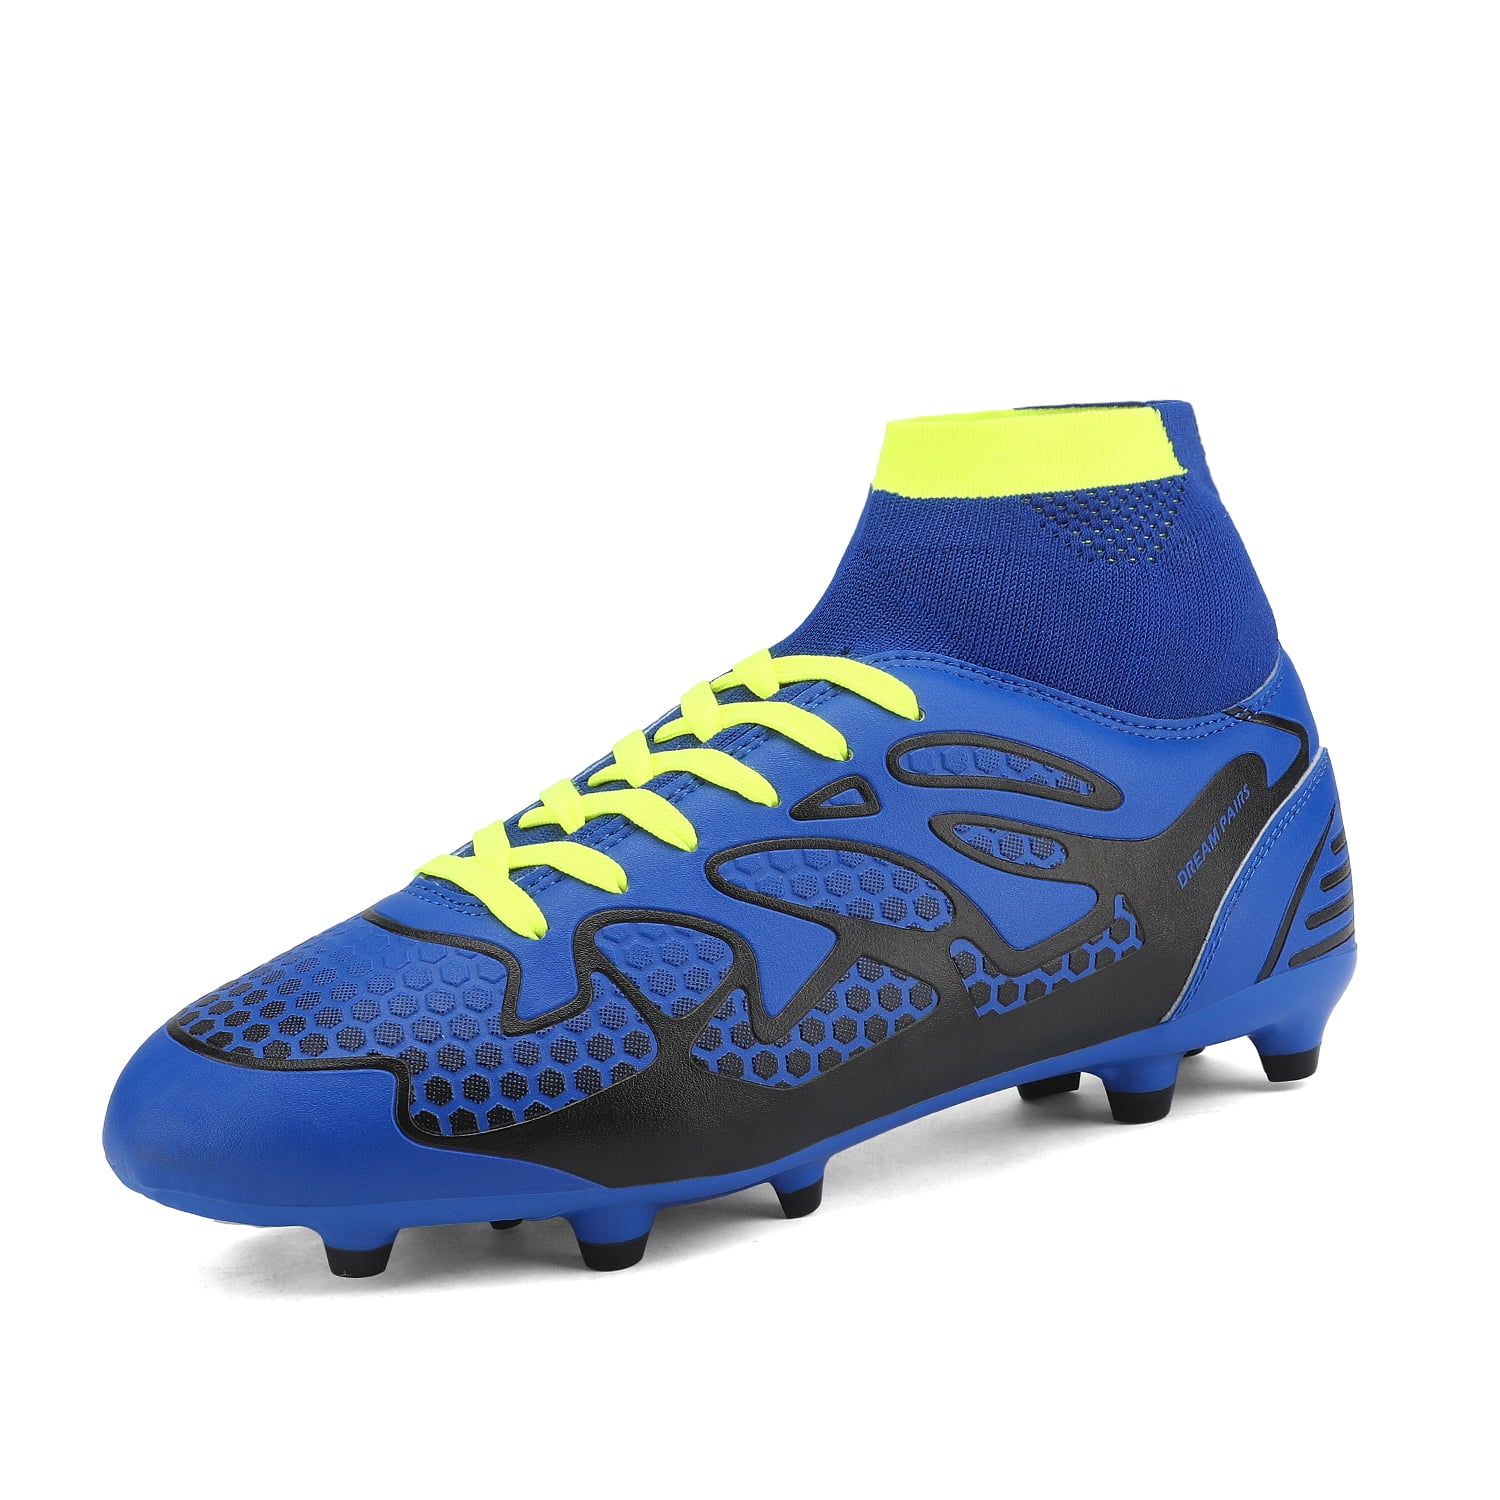 DREAM PAIRS Men's Fashion Cleat Soccer Shoes Football Shoes Trainer Sneakers 160858-M ROYAL/BLACK/NEON/GREEN Size 7.5